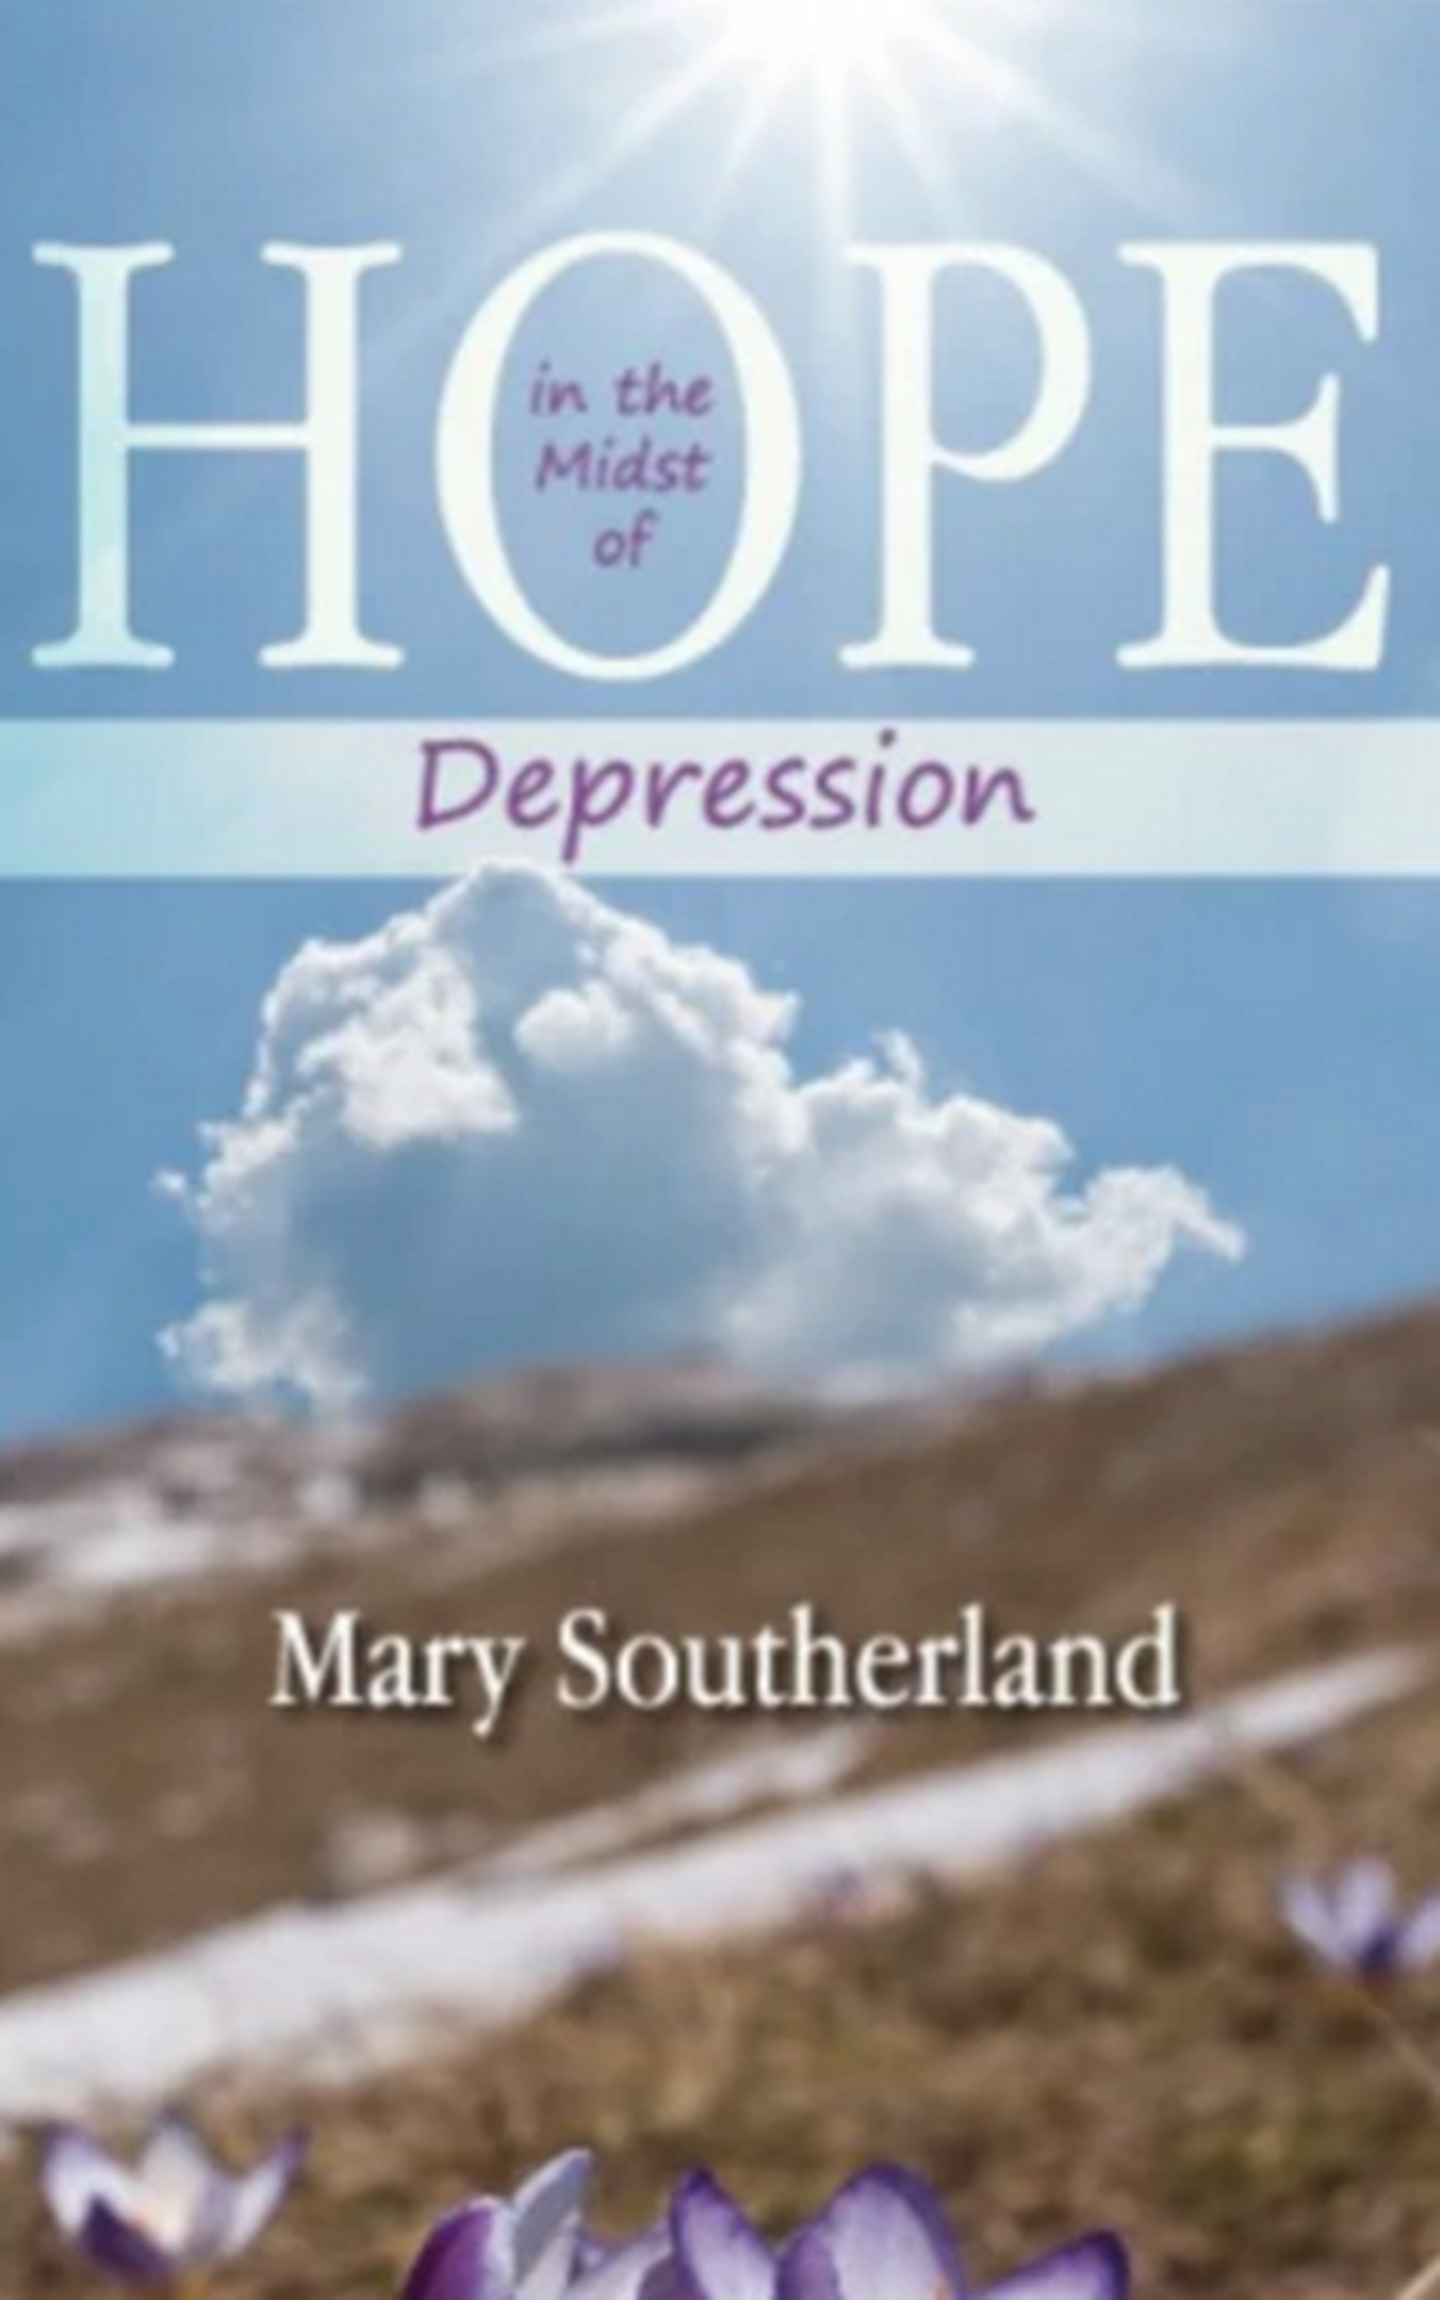 hope in depression book cover